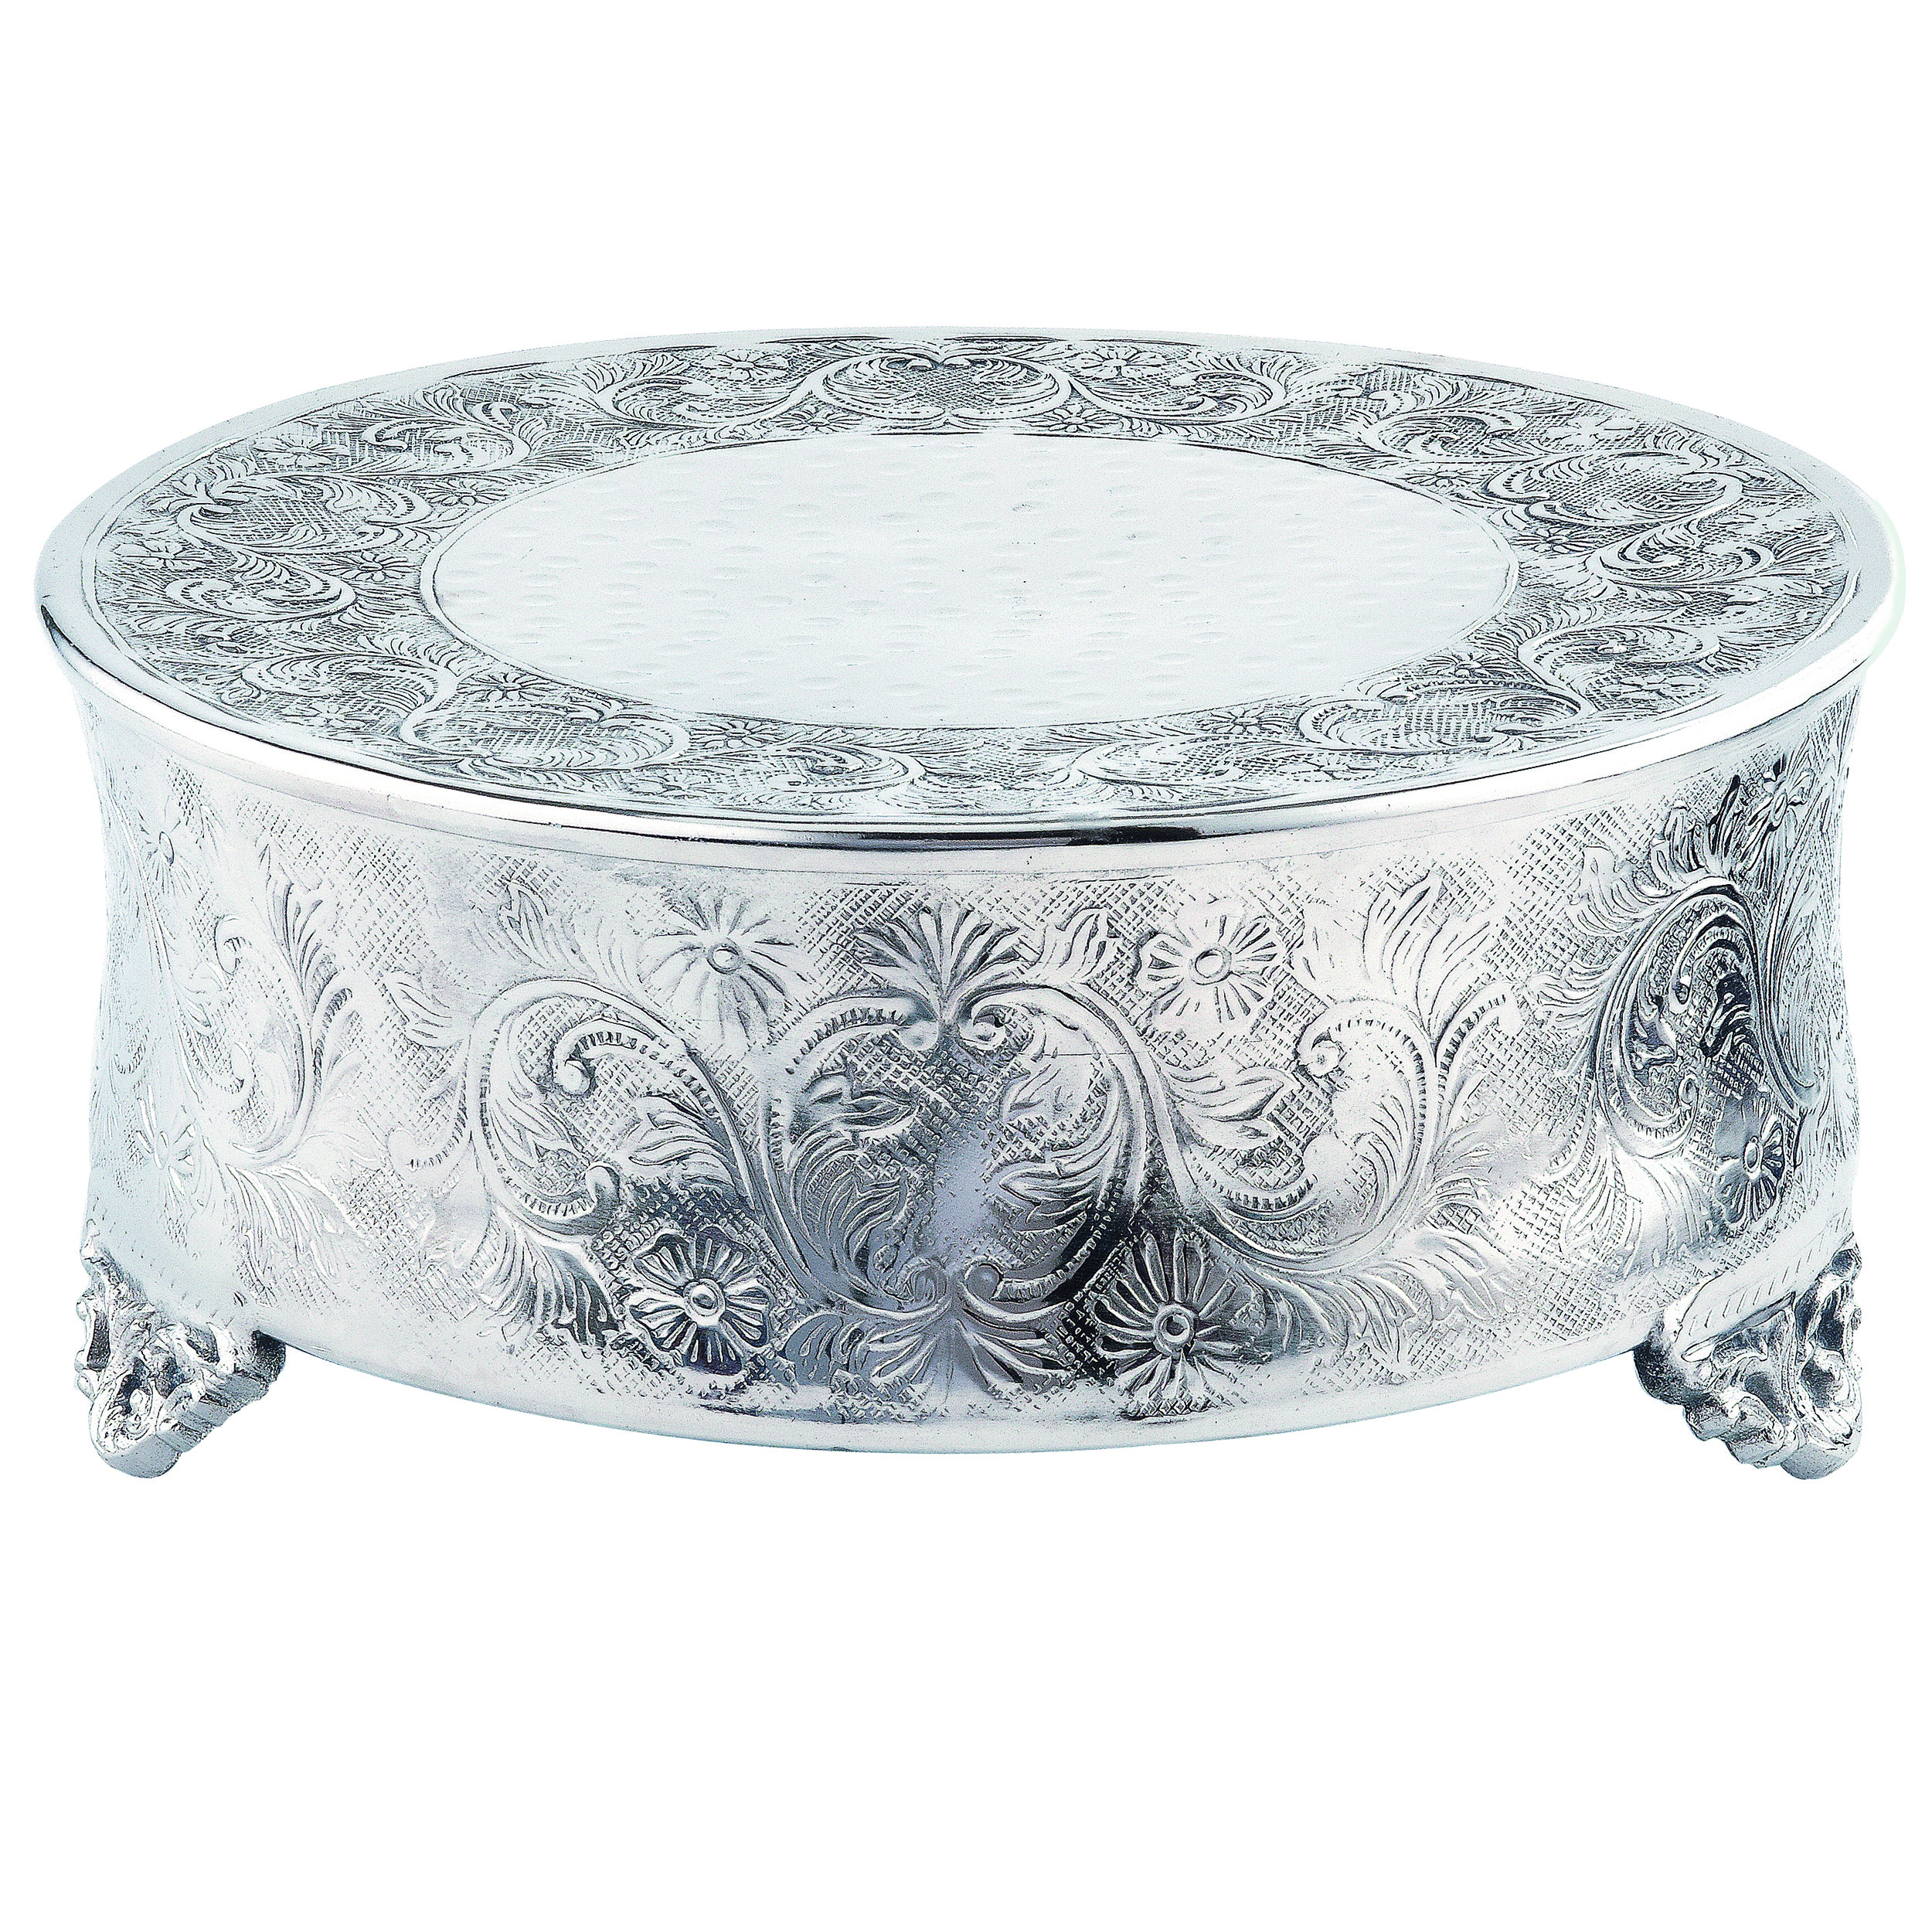 14" Medieval Epic Classic Silver Cake Stand Round - Item # 5814